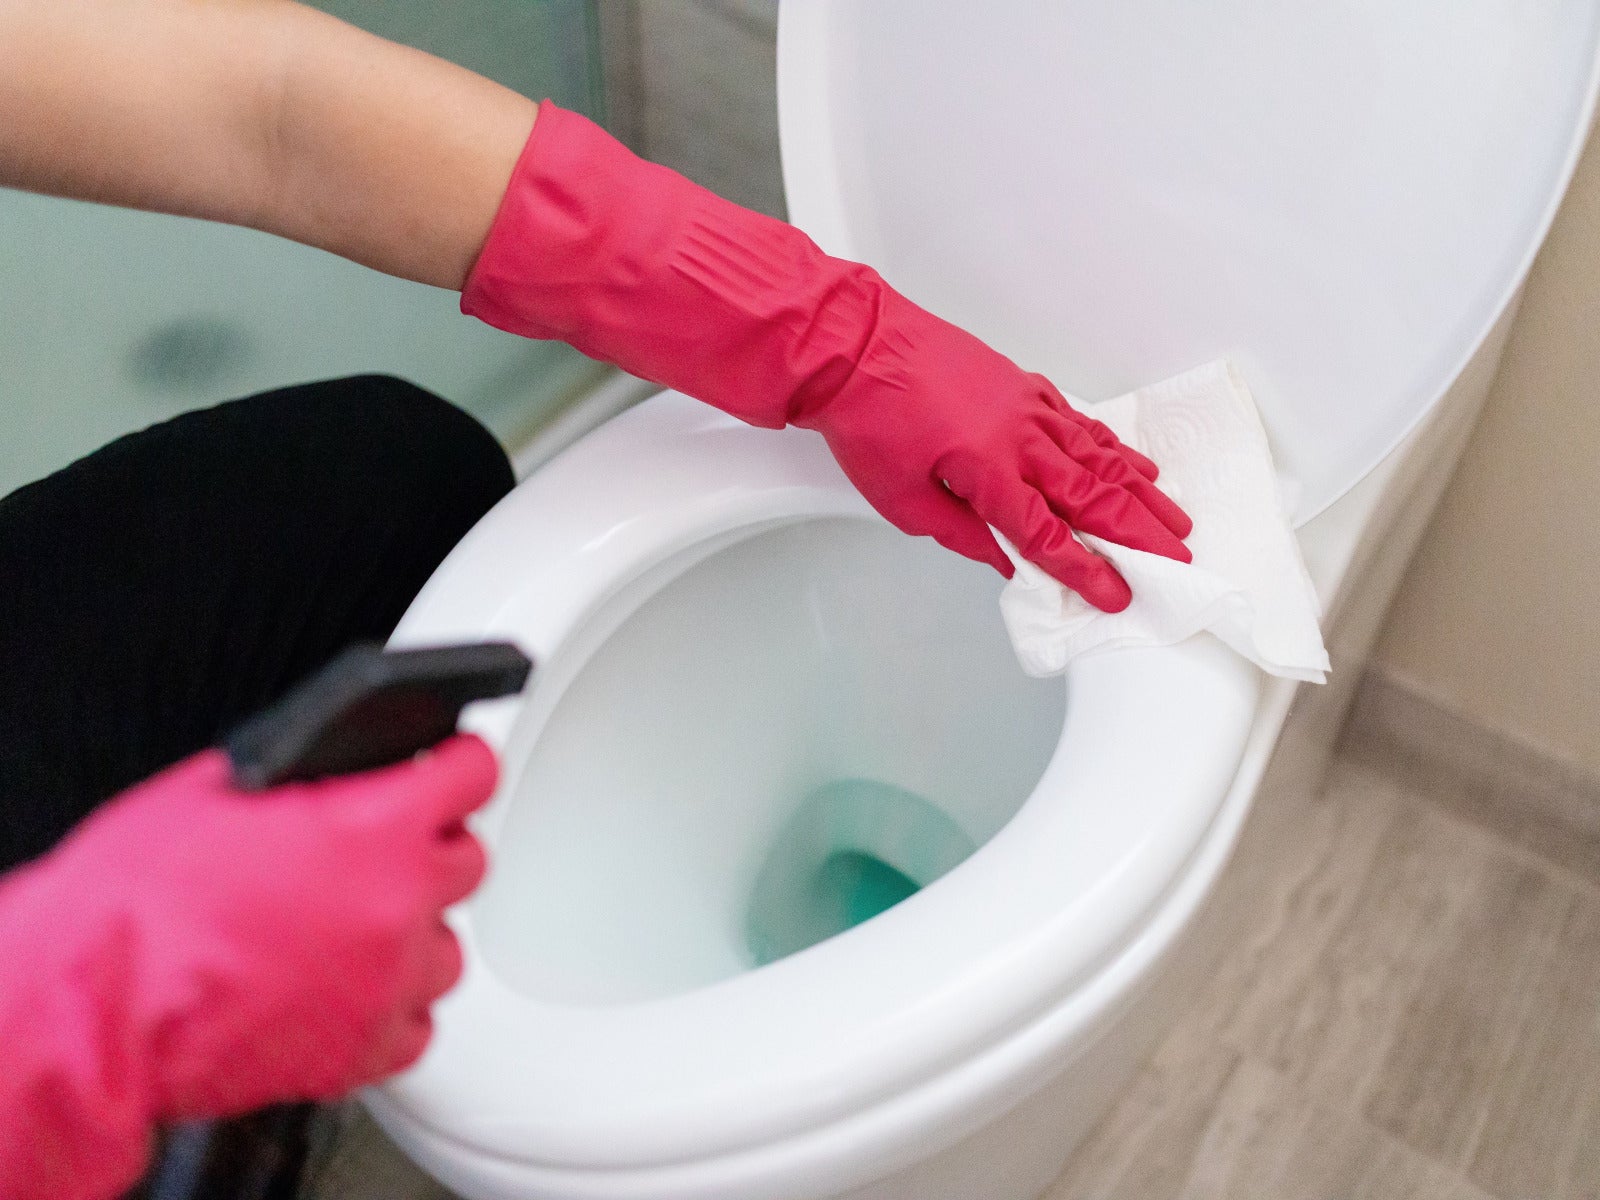 How To Clean A Toilet 1900297 01 201C3F2023334460Bd082Fe848A64C67